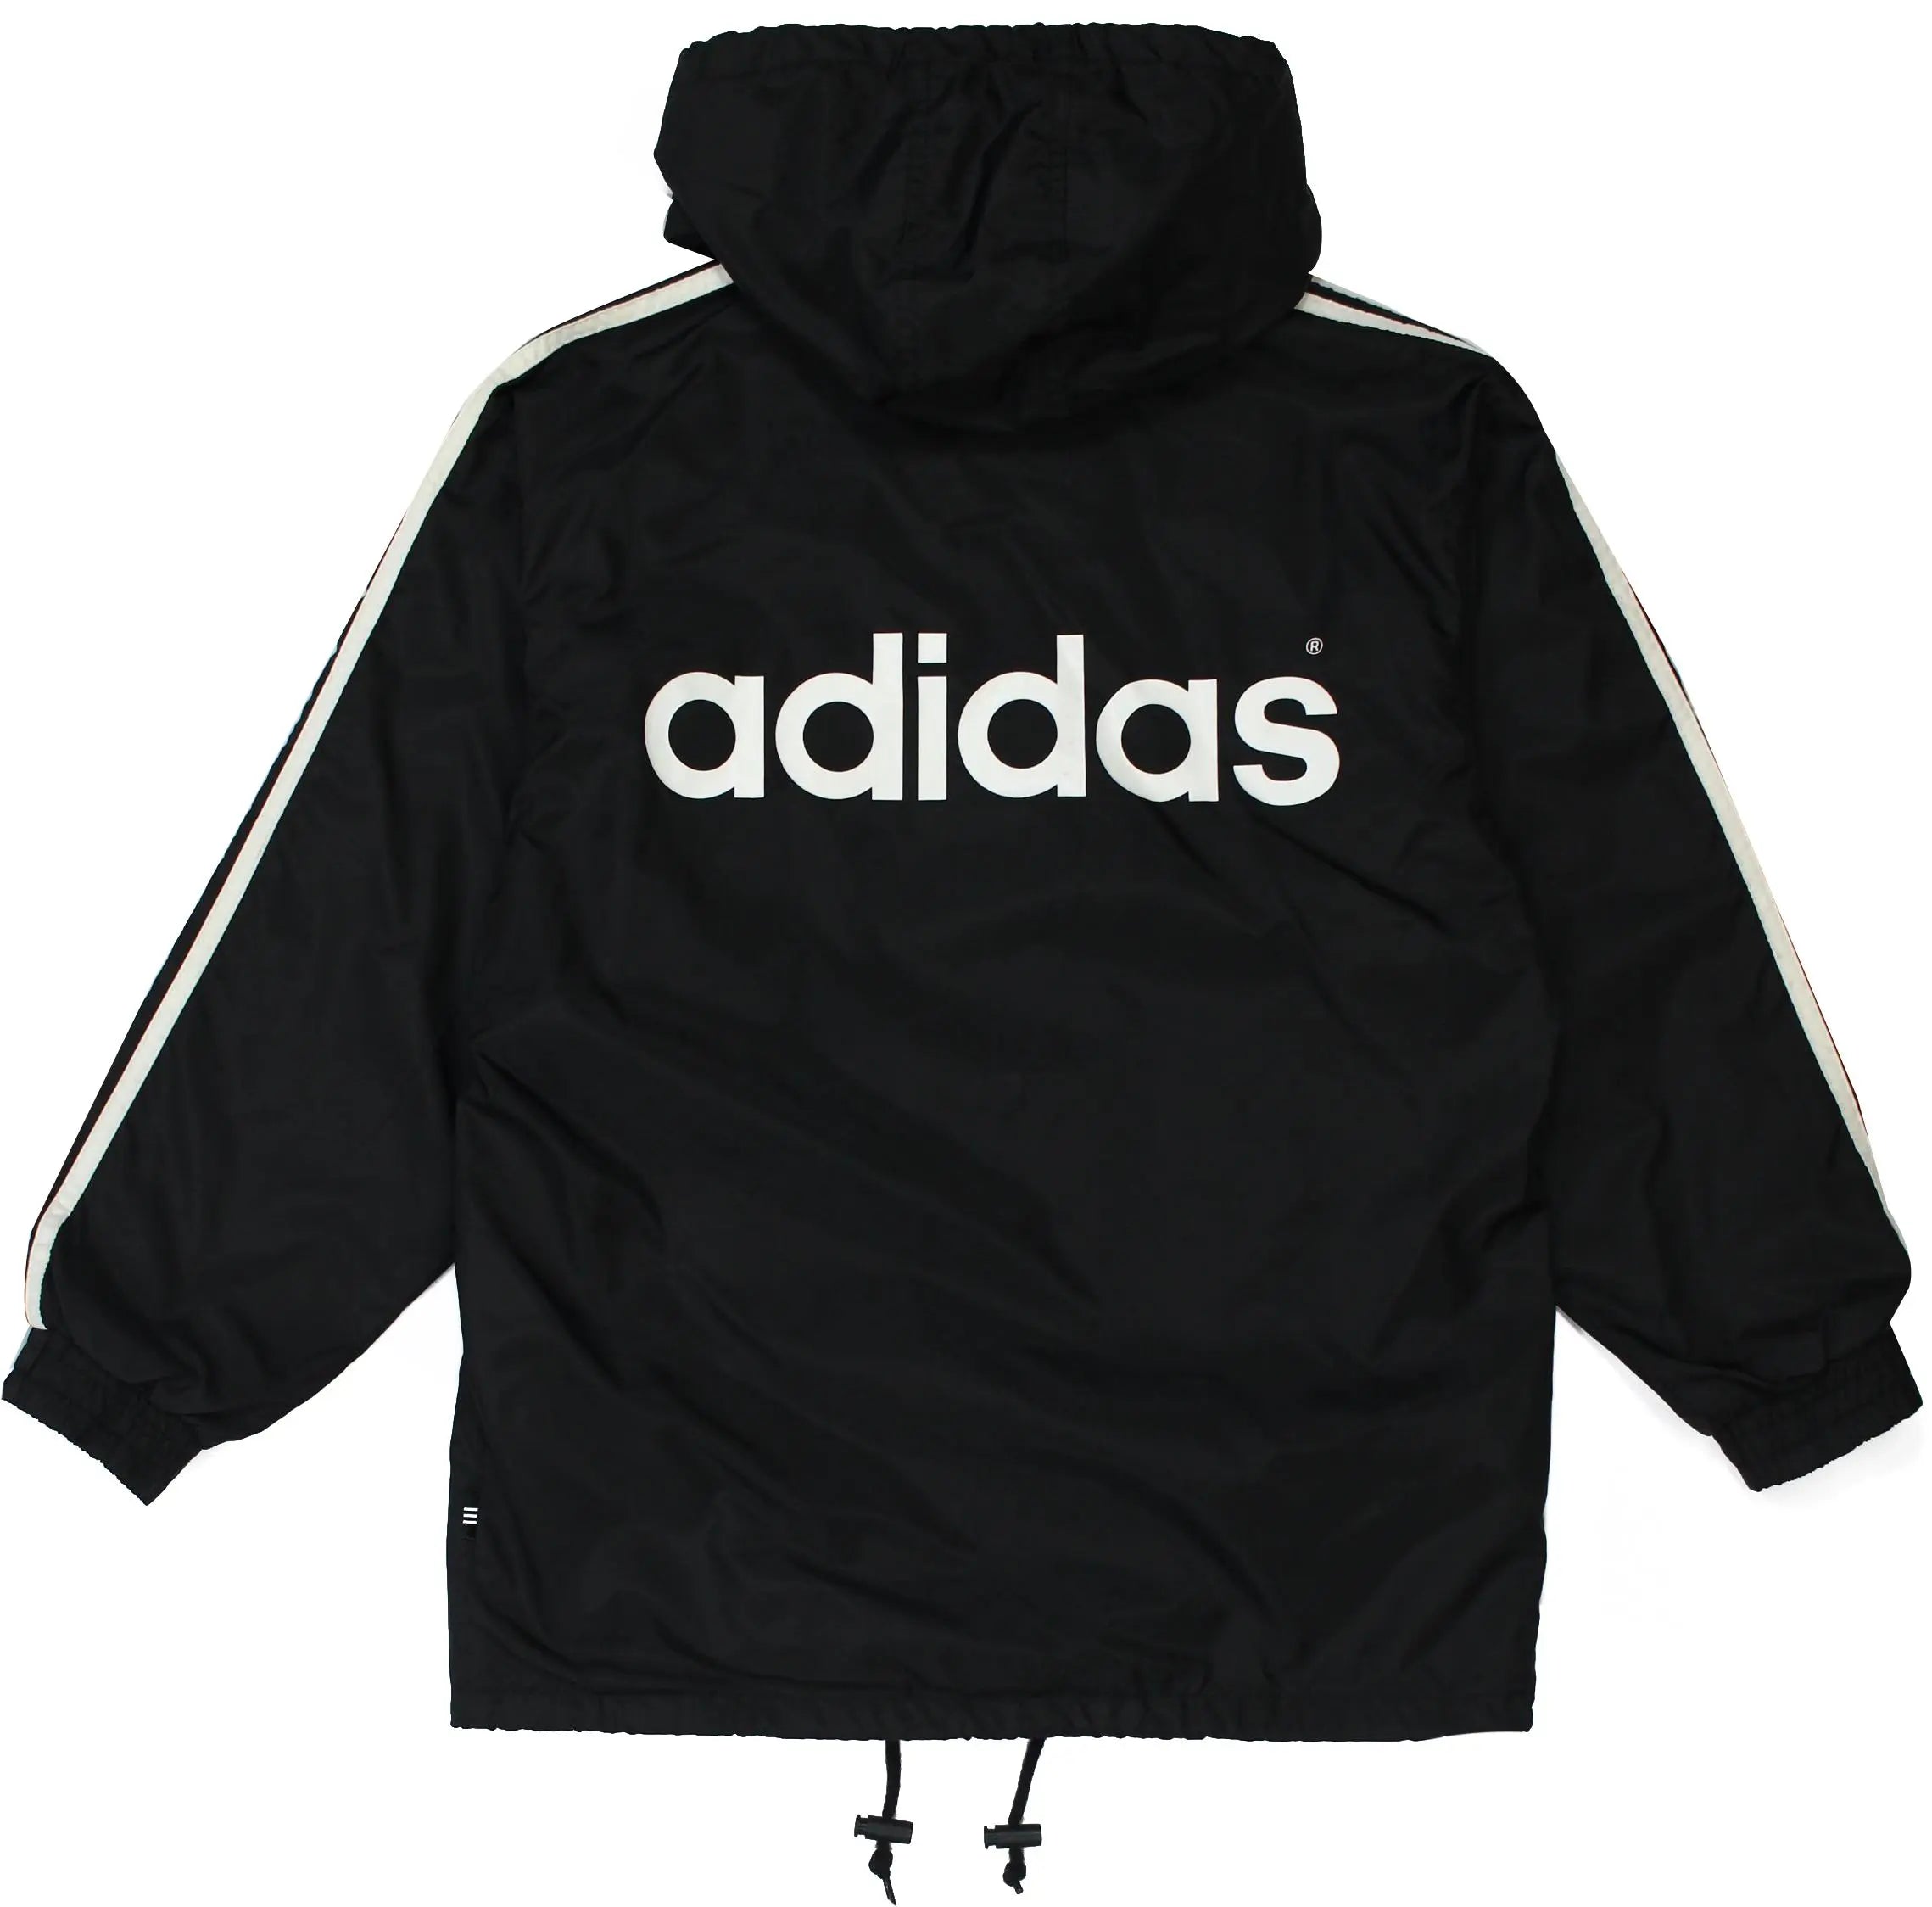 Adidas - Black Jacket by Adidas- ThriftTale.com - Vintage and second handclothing